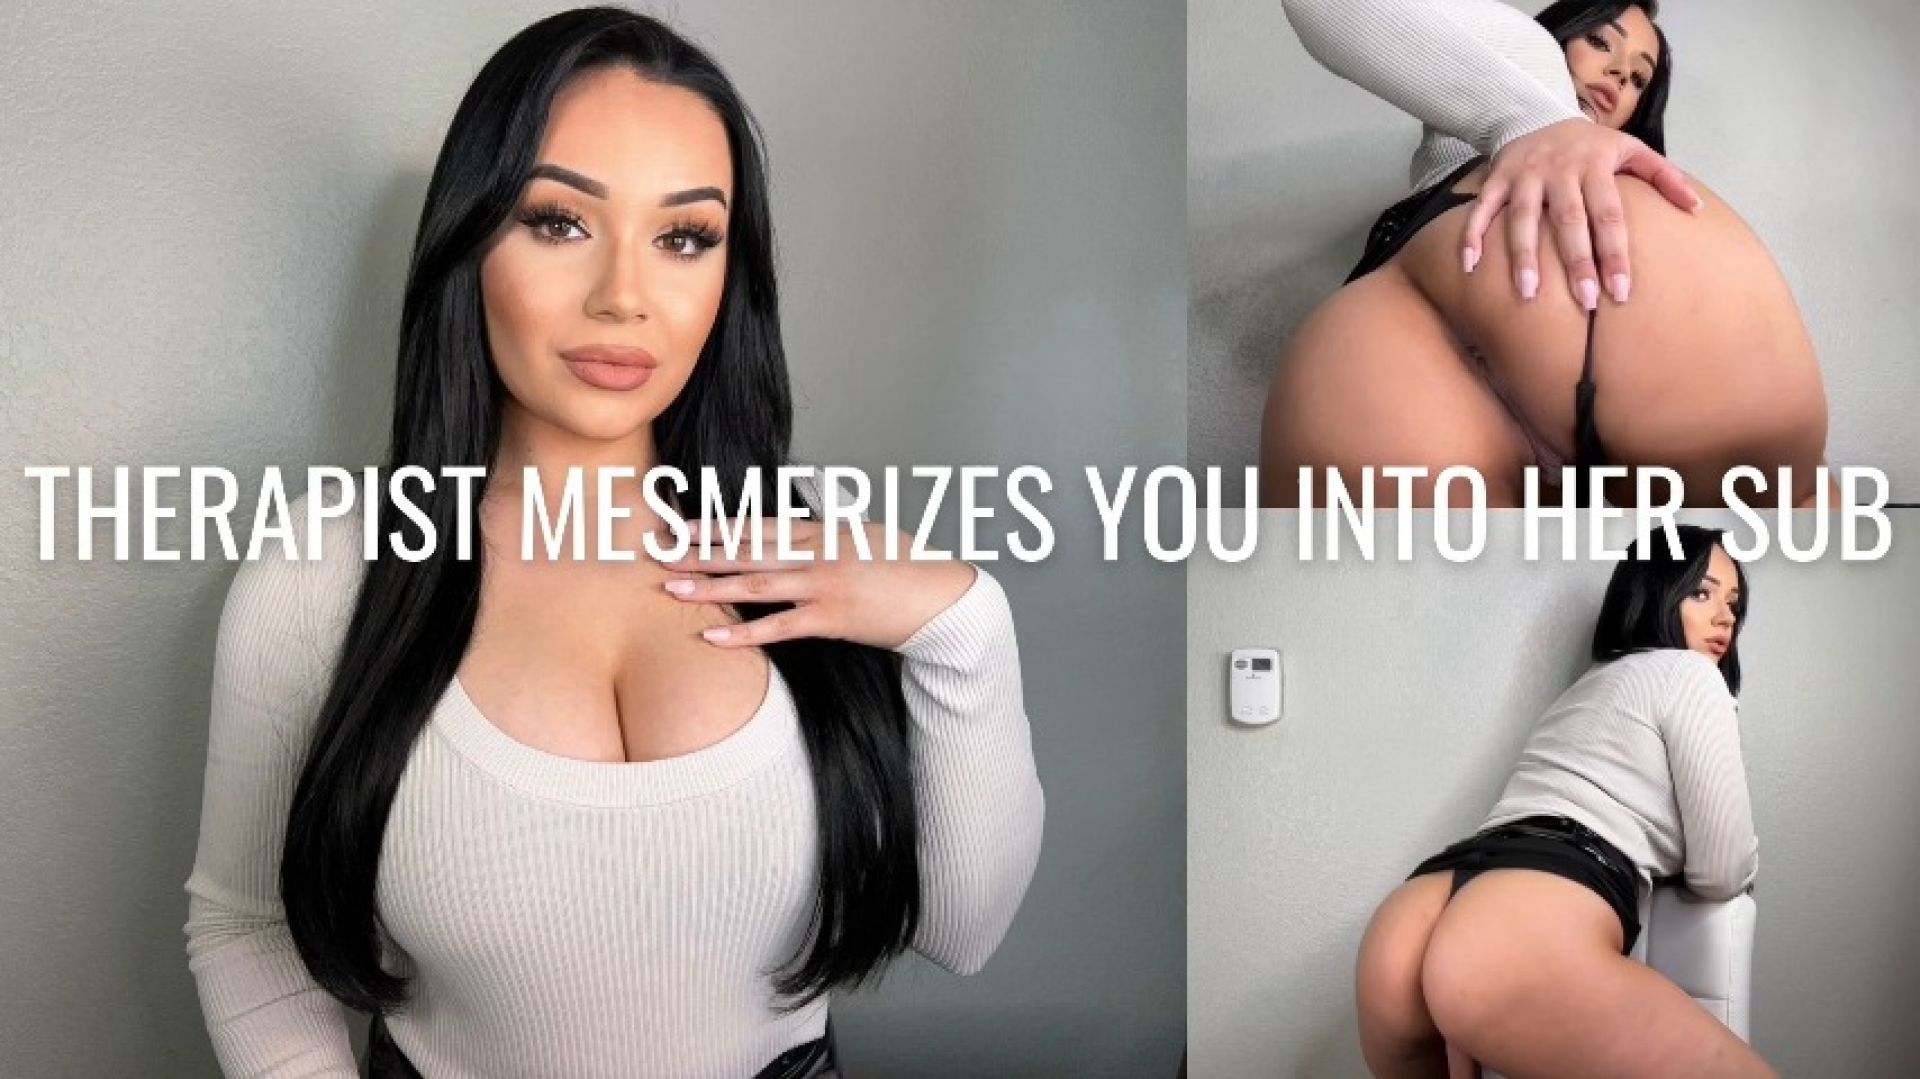 THERAPIST MESMERIZES YOU INTO HER SUB